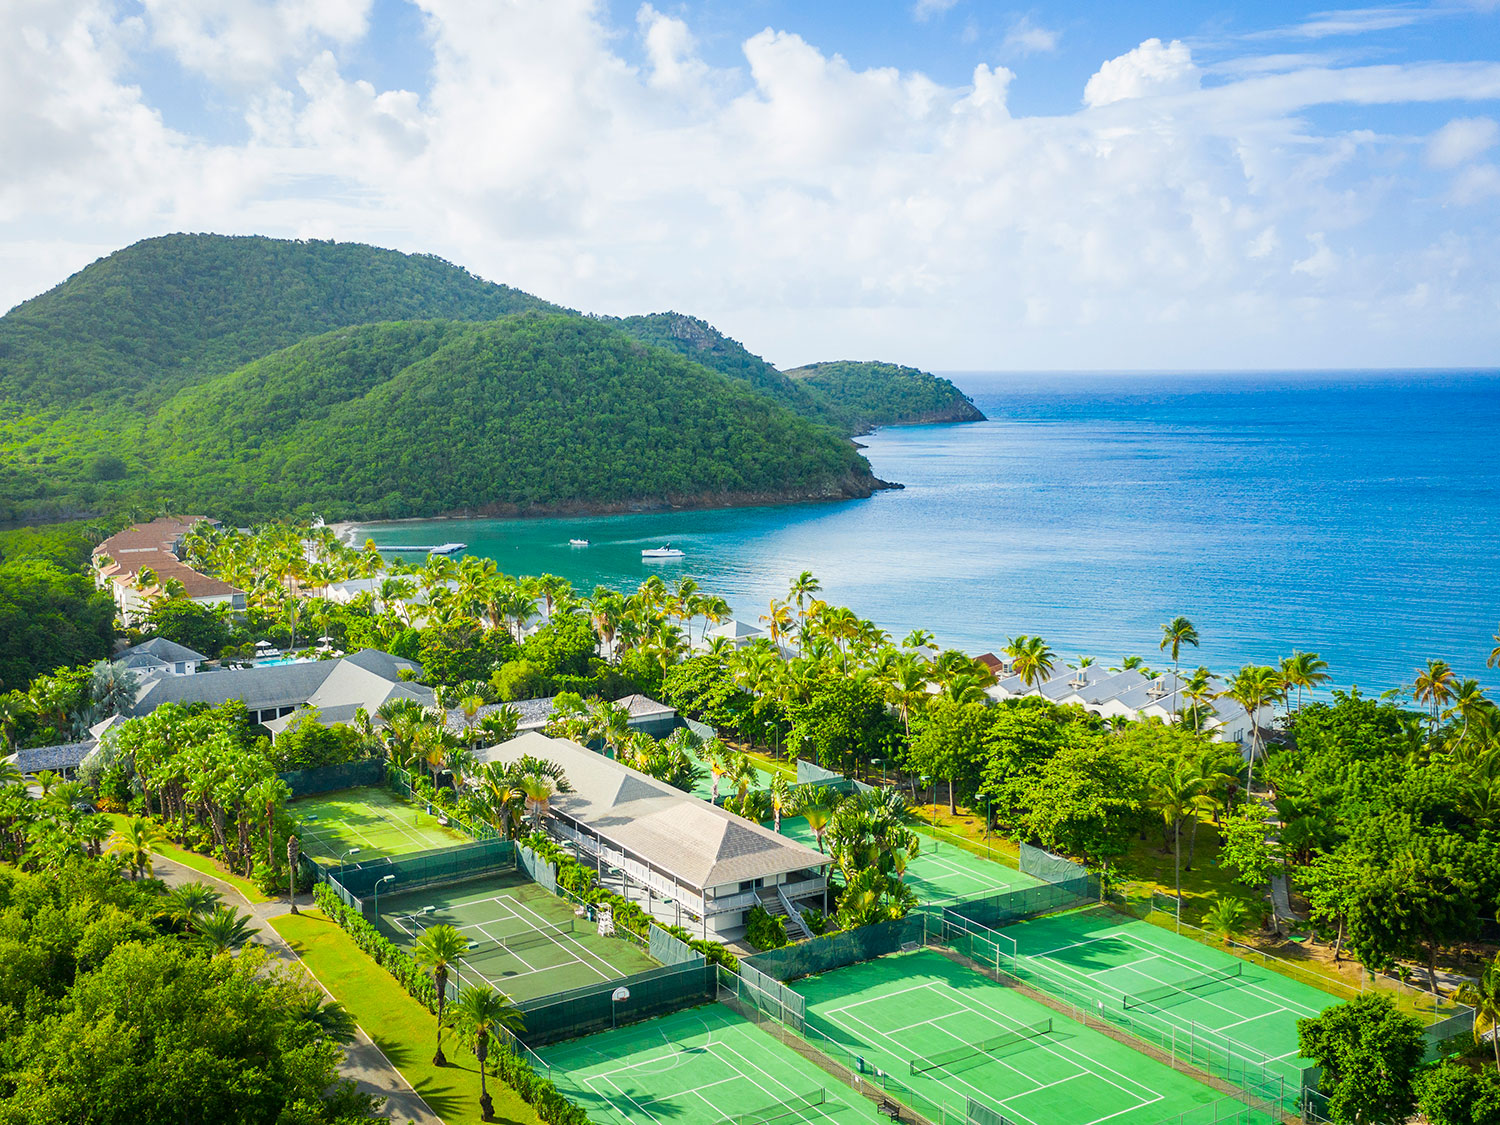 The tennis courts of Carlisle Bay in Antigua.